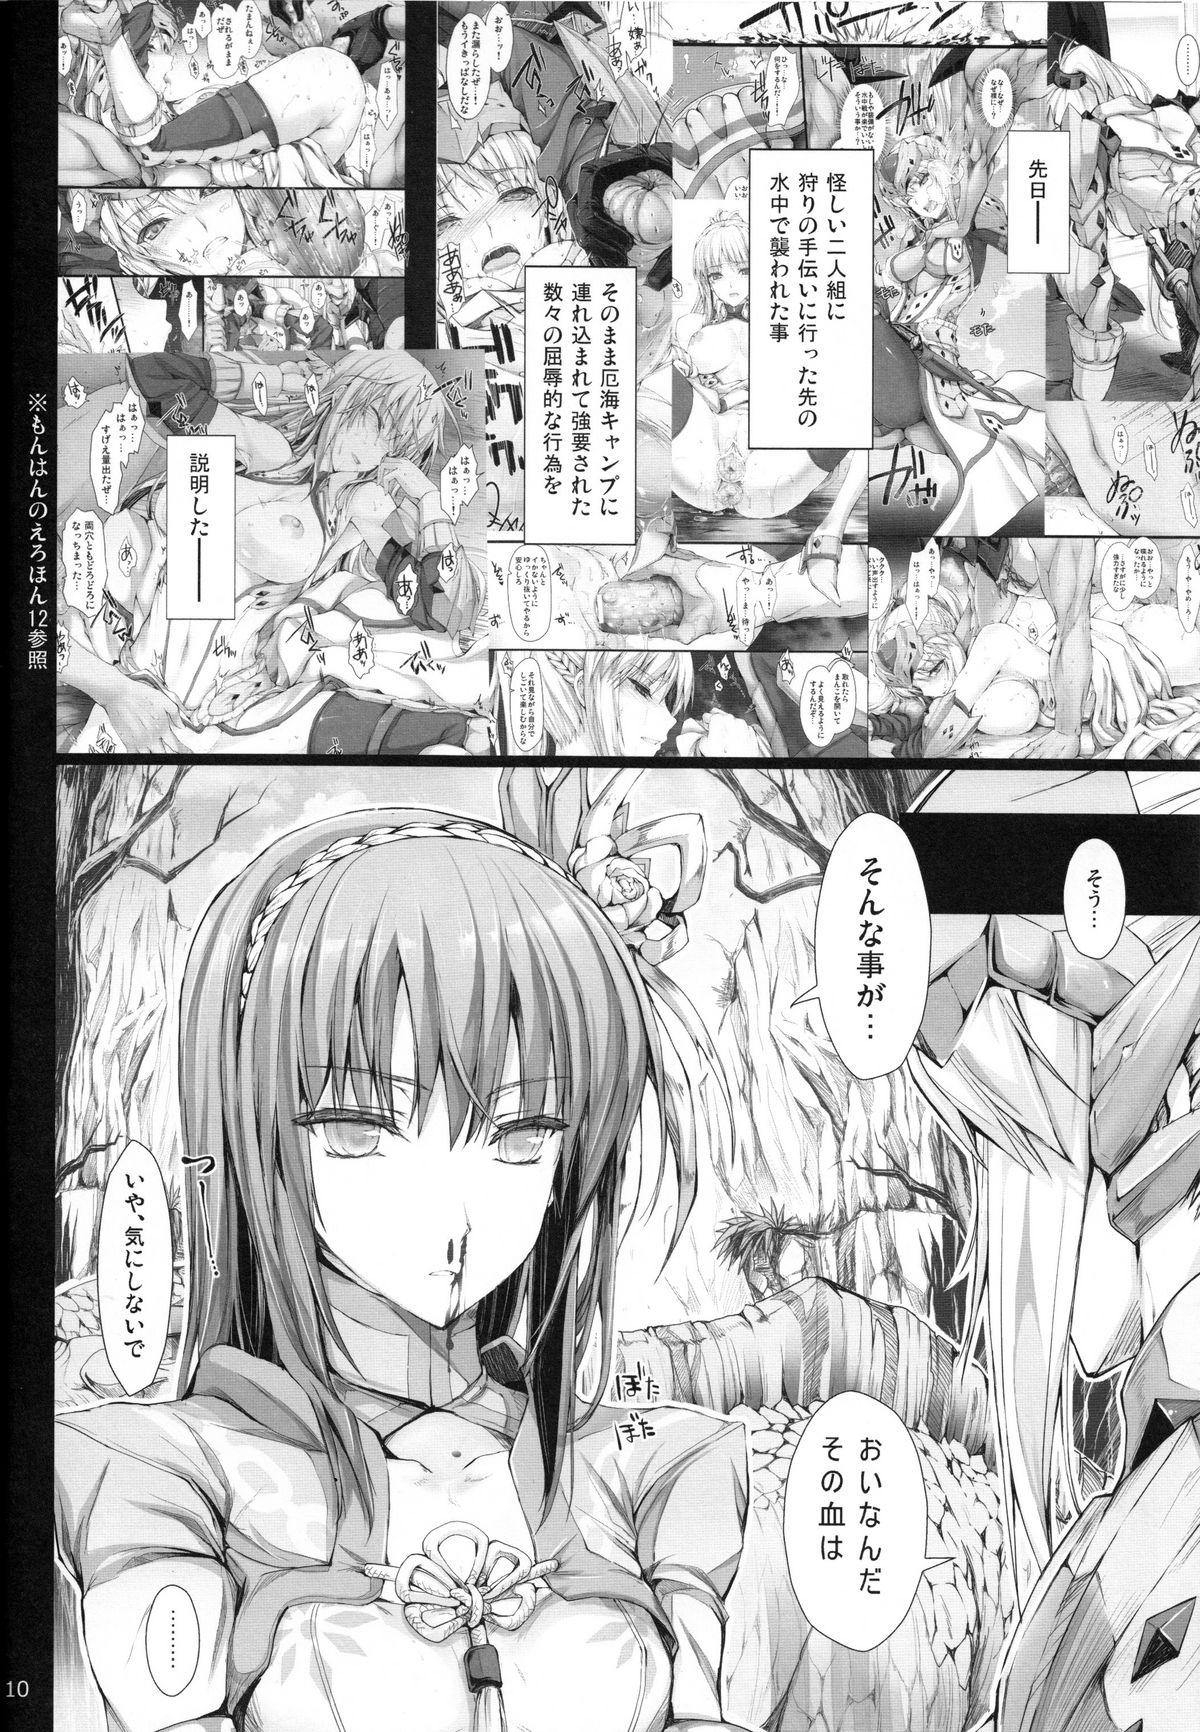 Oral Sex Monhan no Erohon 13 - Monster hunter Hot Wife - Page 9